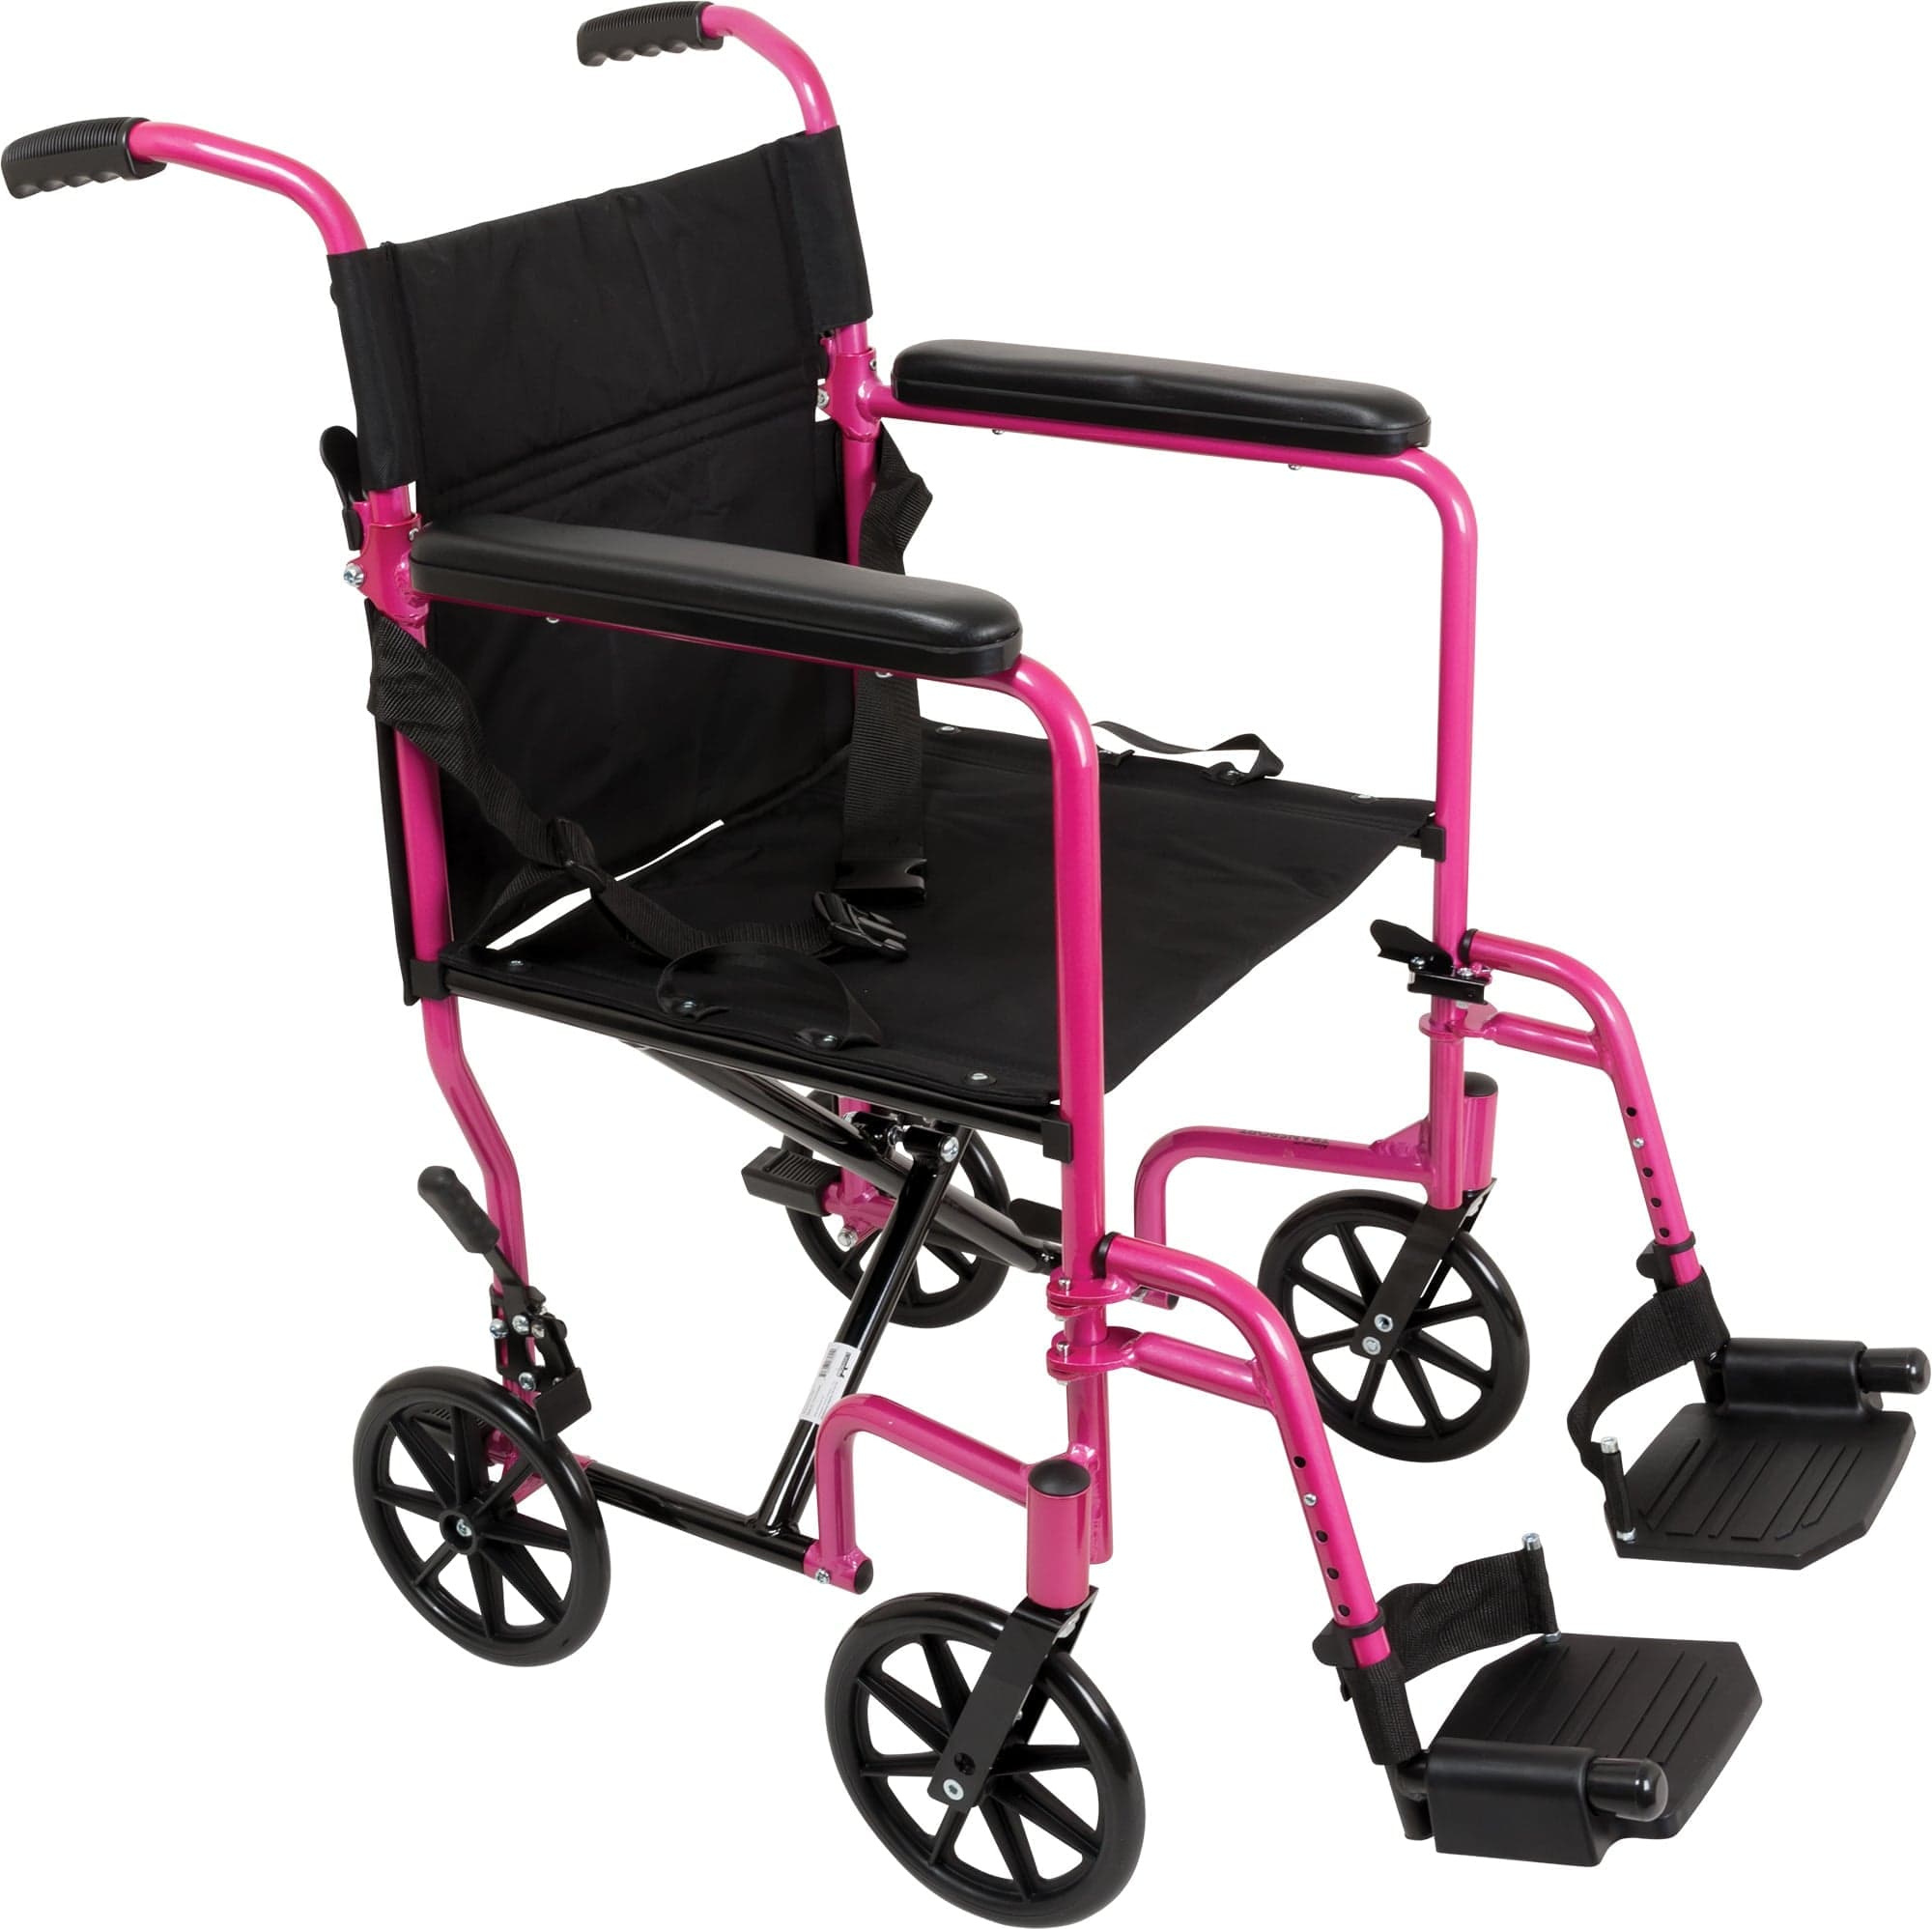 Compass Health Transport Wheelchairs Compass Health ProBasics Aluminum Transport Wheelchair, 19-inch, Pink